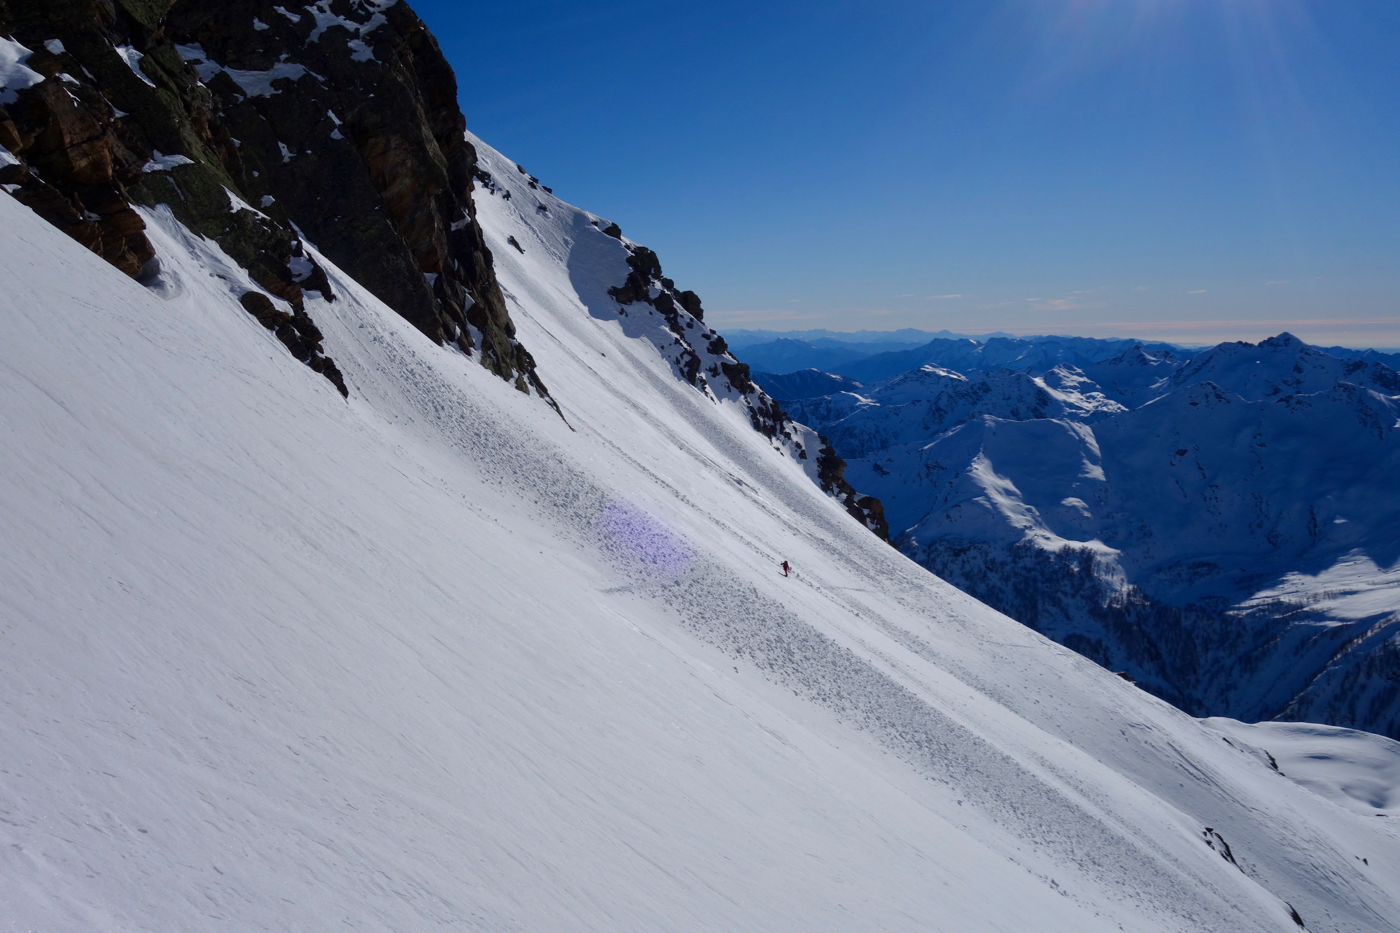 Traversing to the couloir